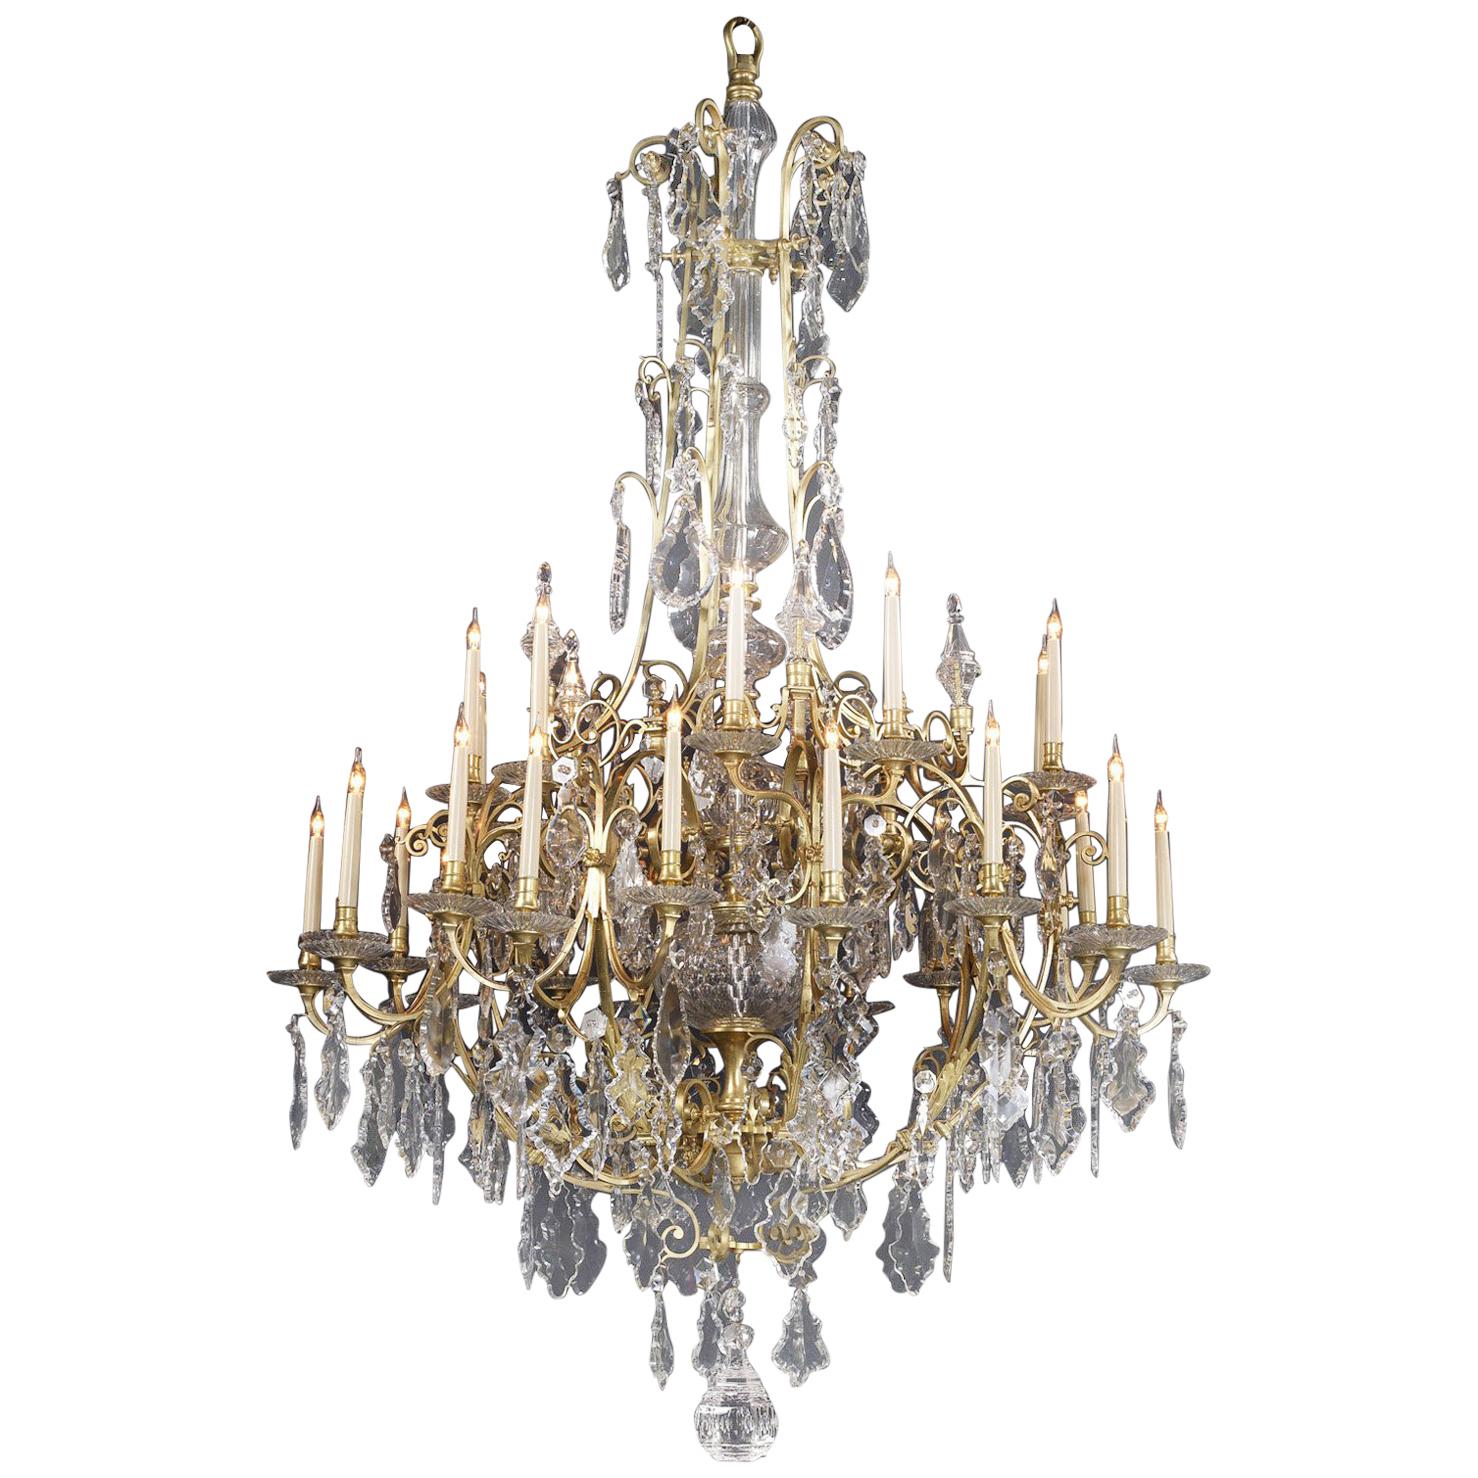 Large Louis XV Style Cut-Glass Thirty-Light Cage Chandelier, circa 1870